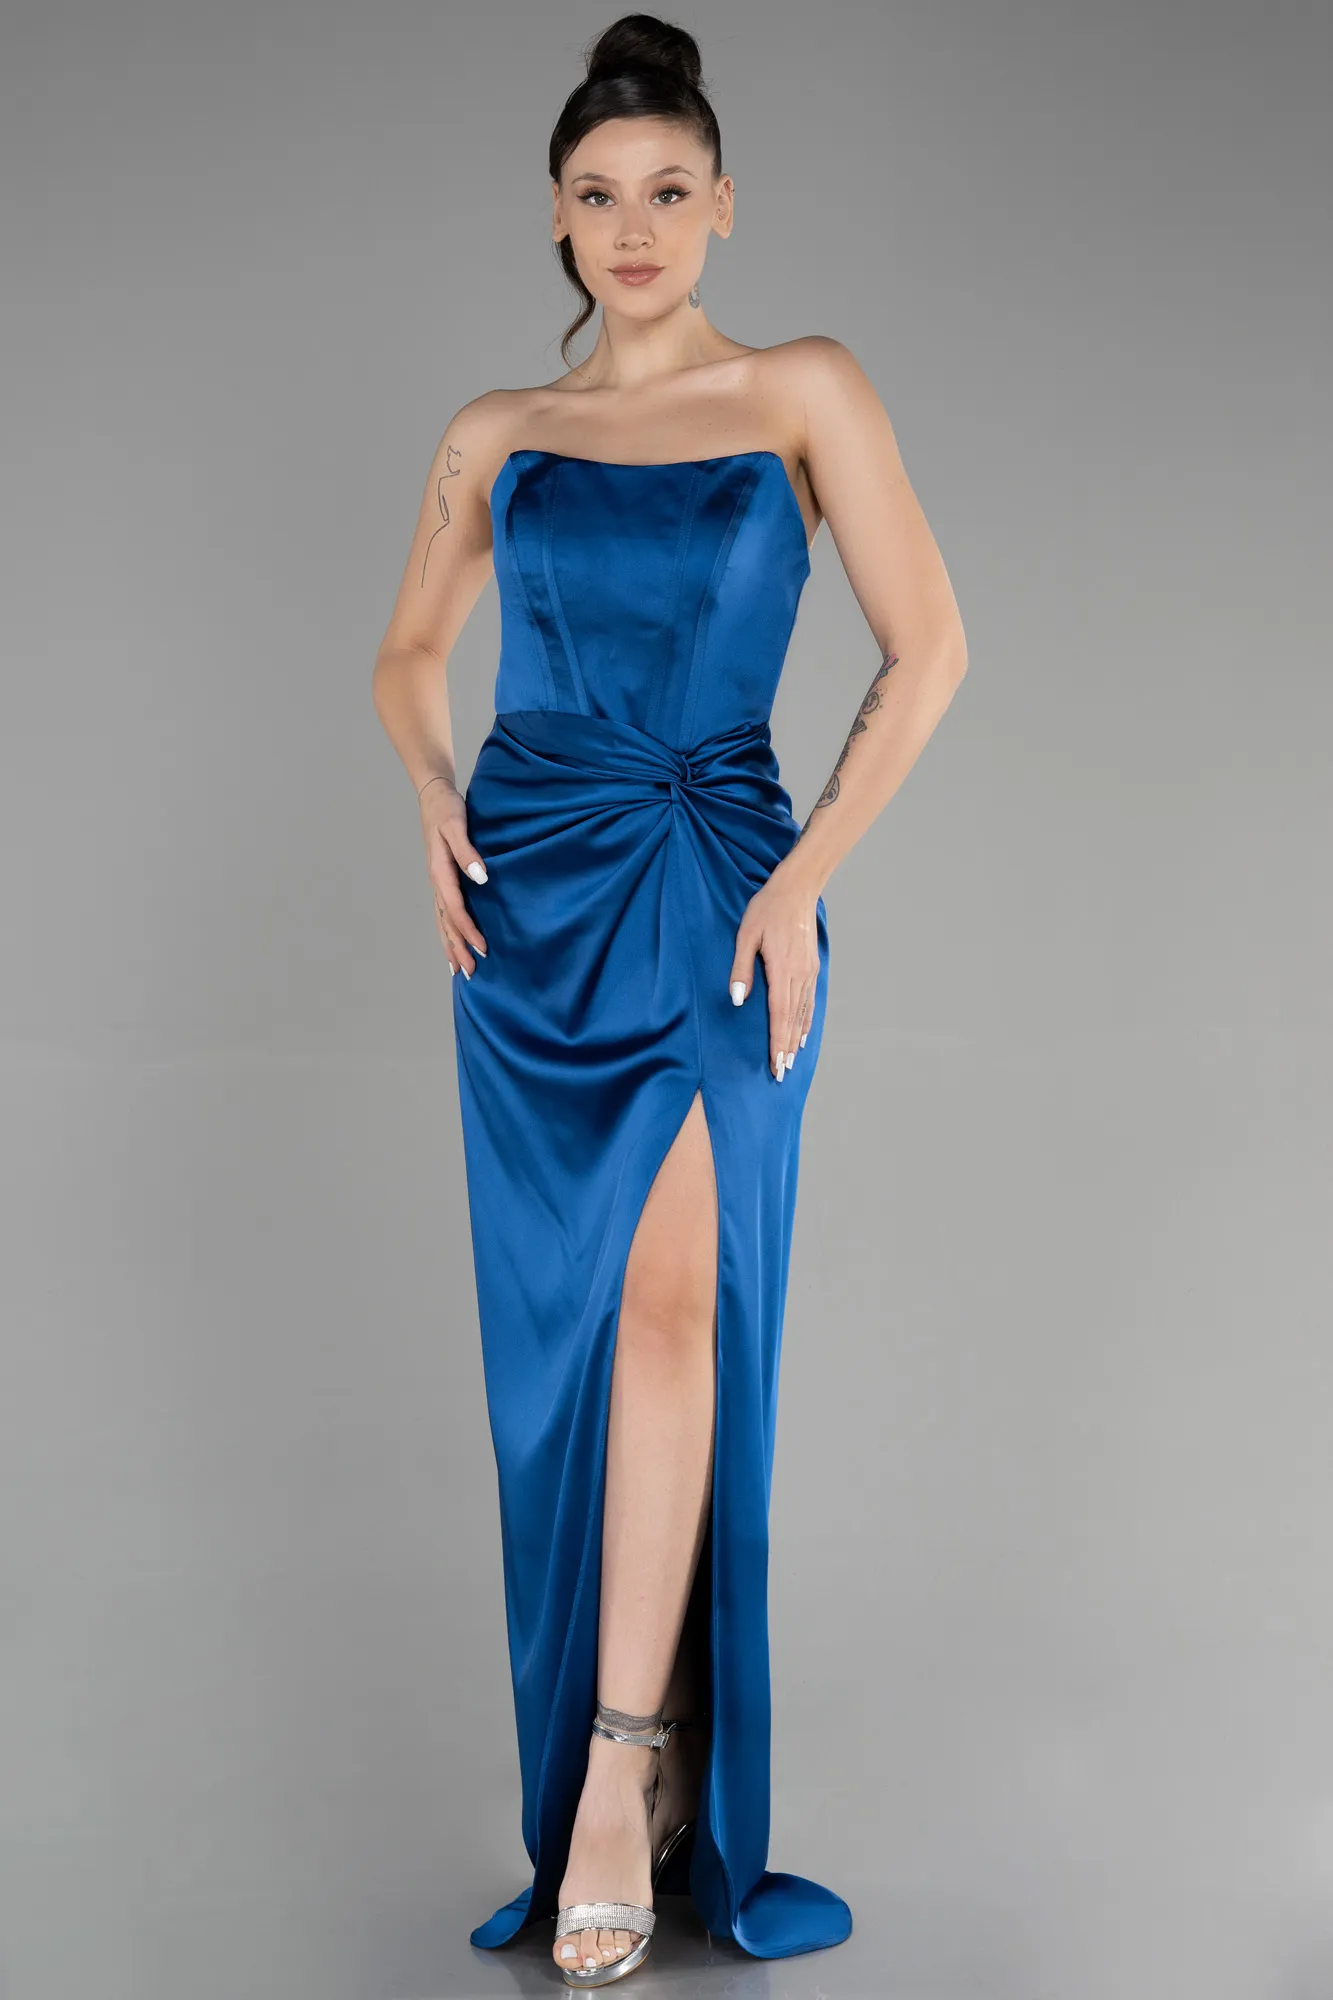 Parlement Blue-Long Satin Prom Gown ABU3474